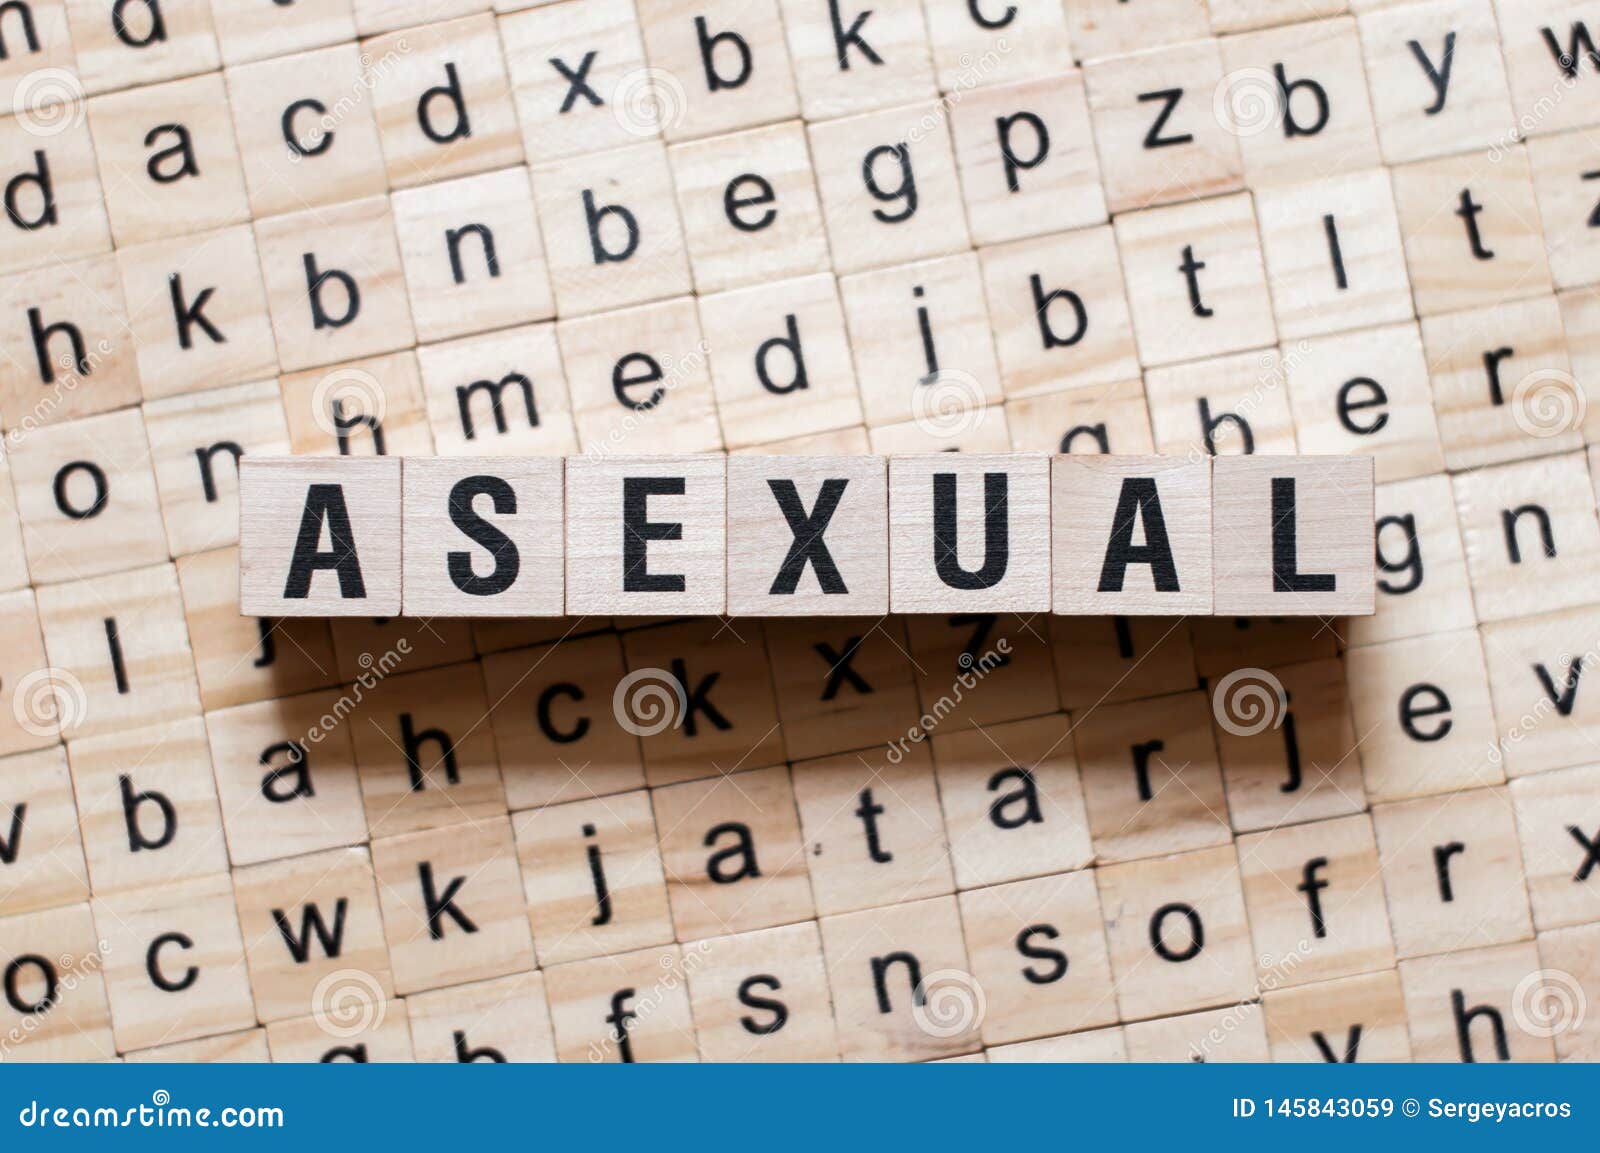 asexual word concept